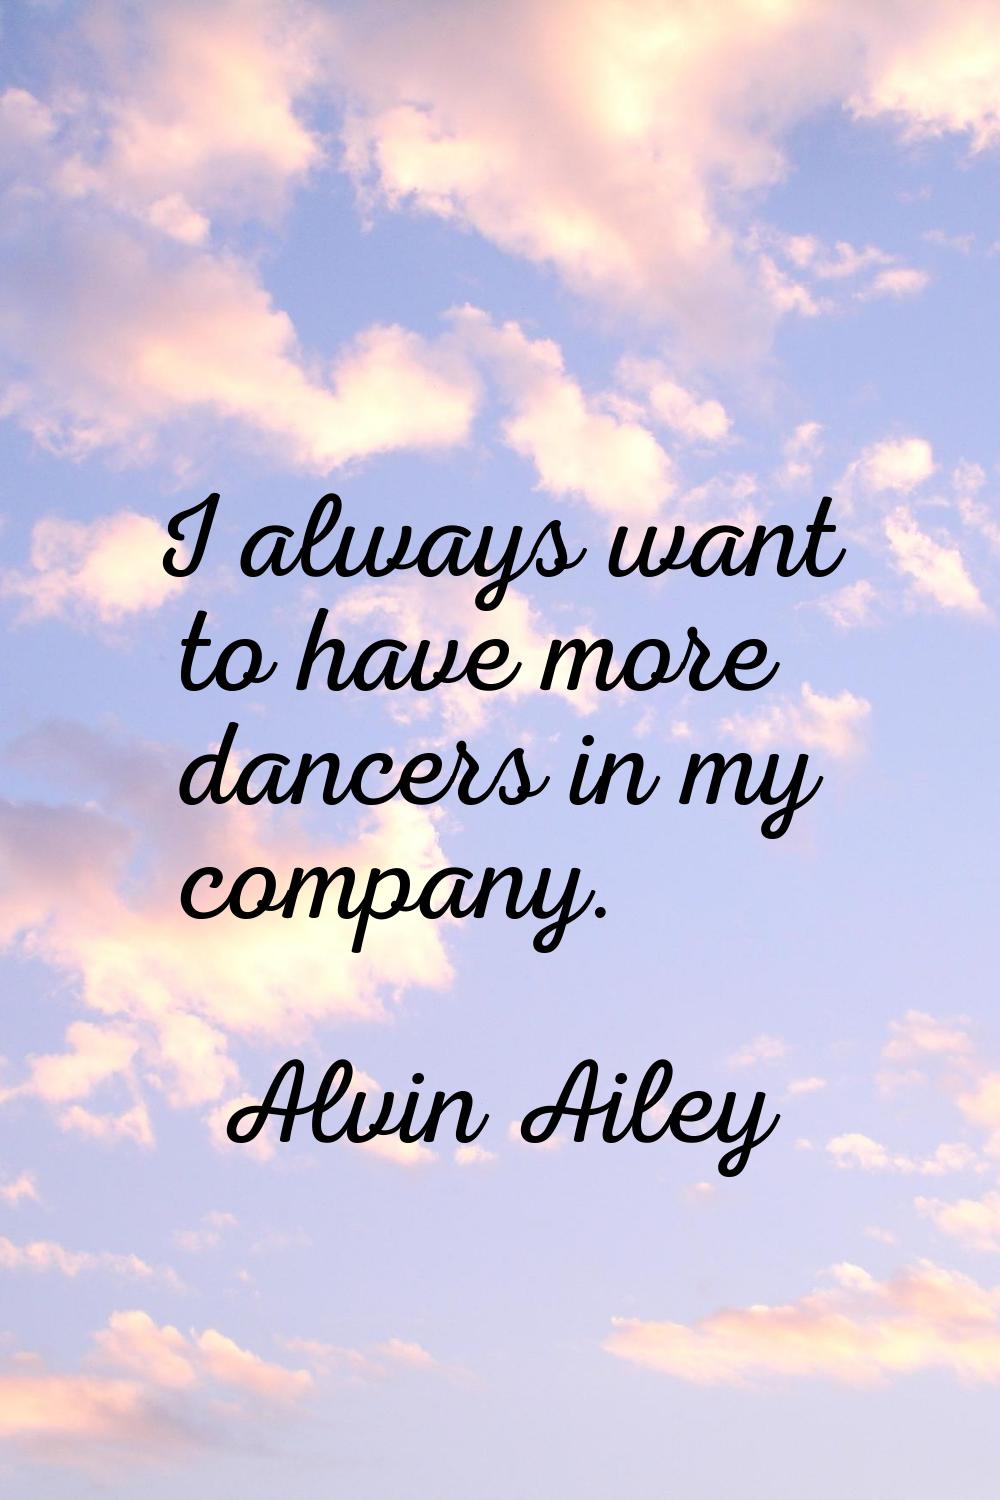 I always want to have more dancers in my company.